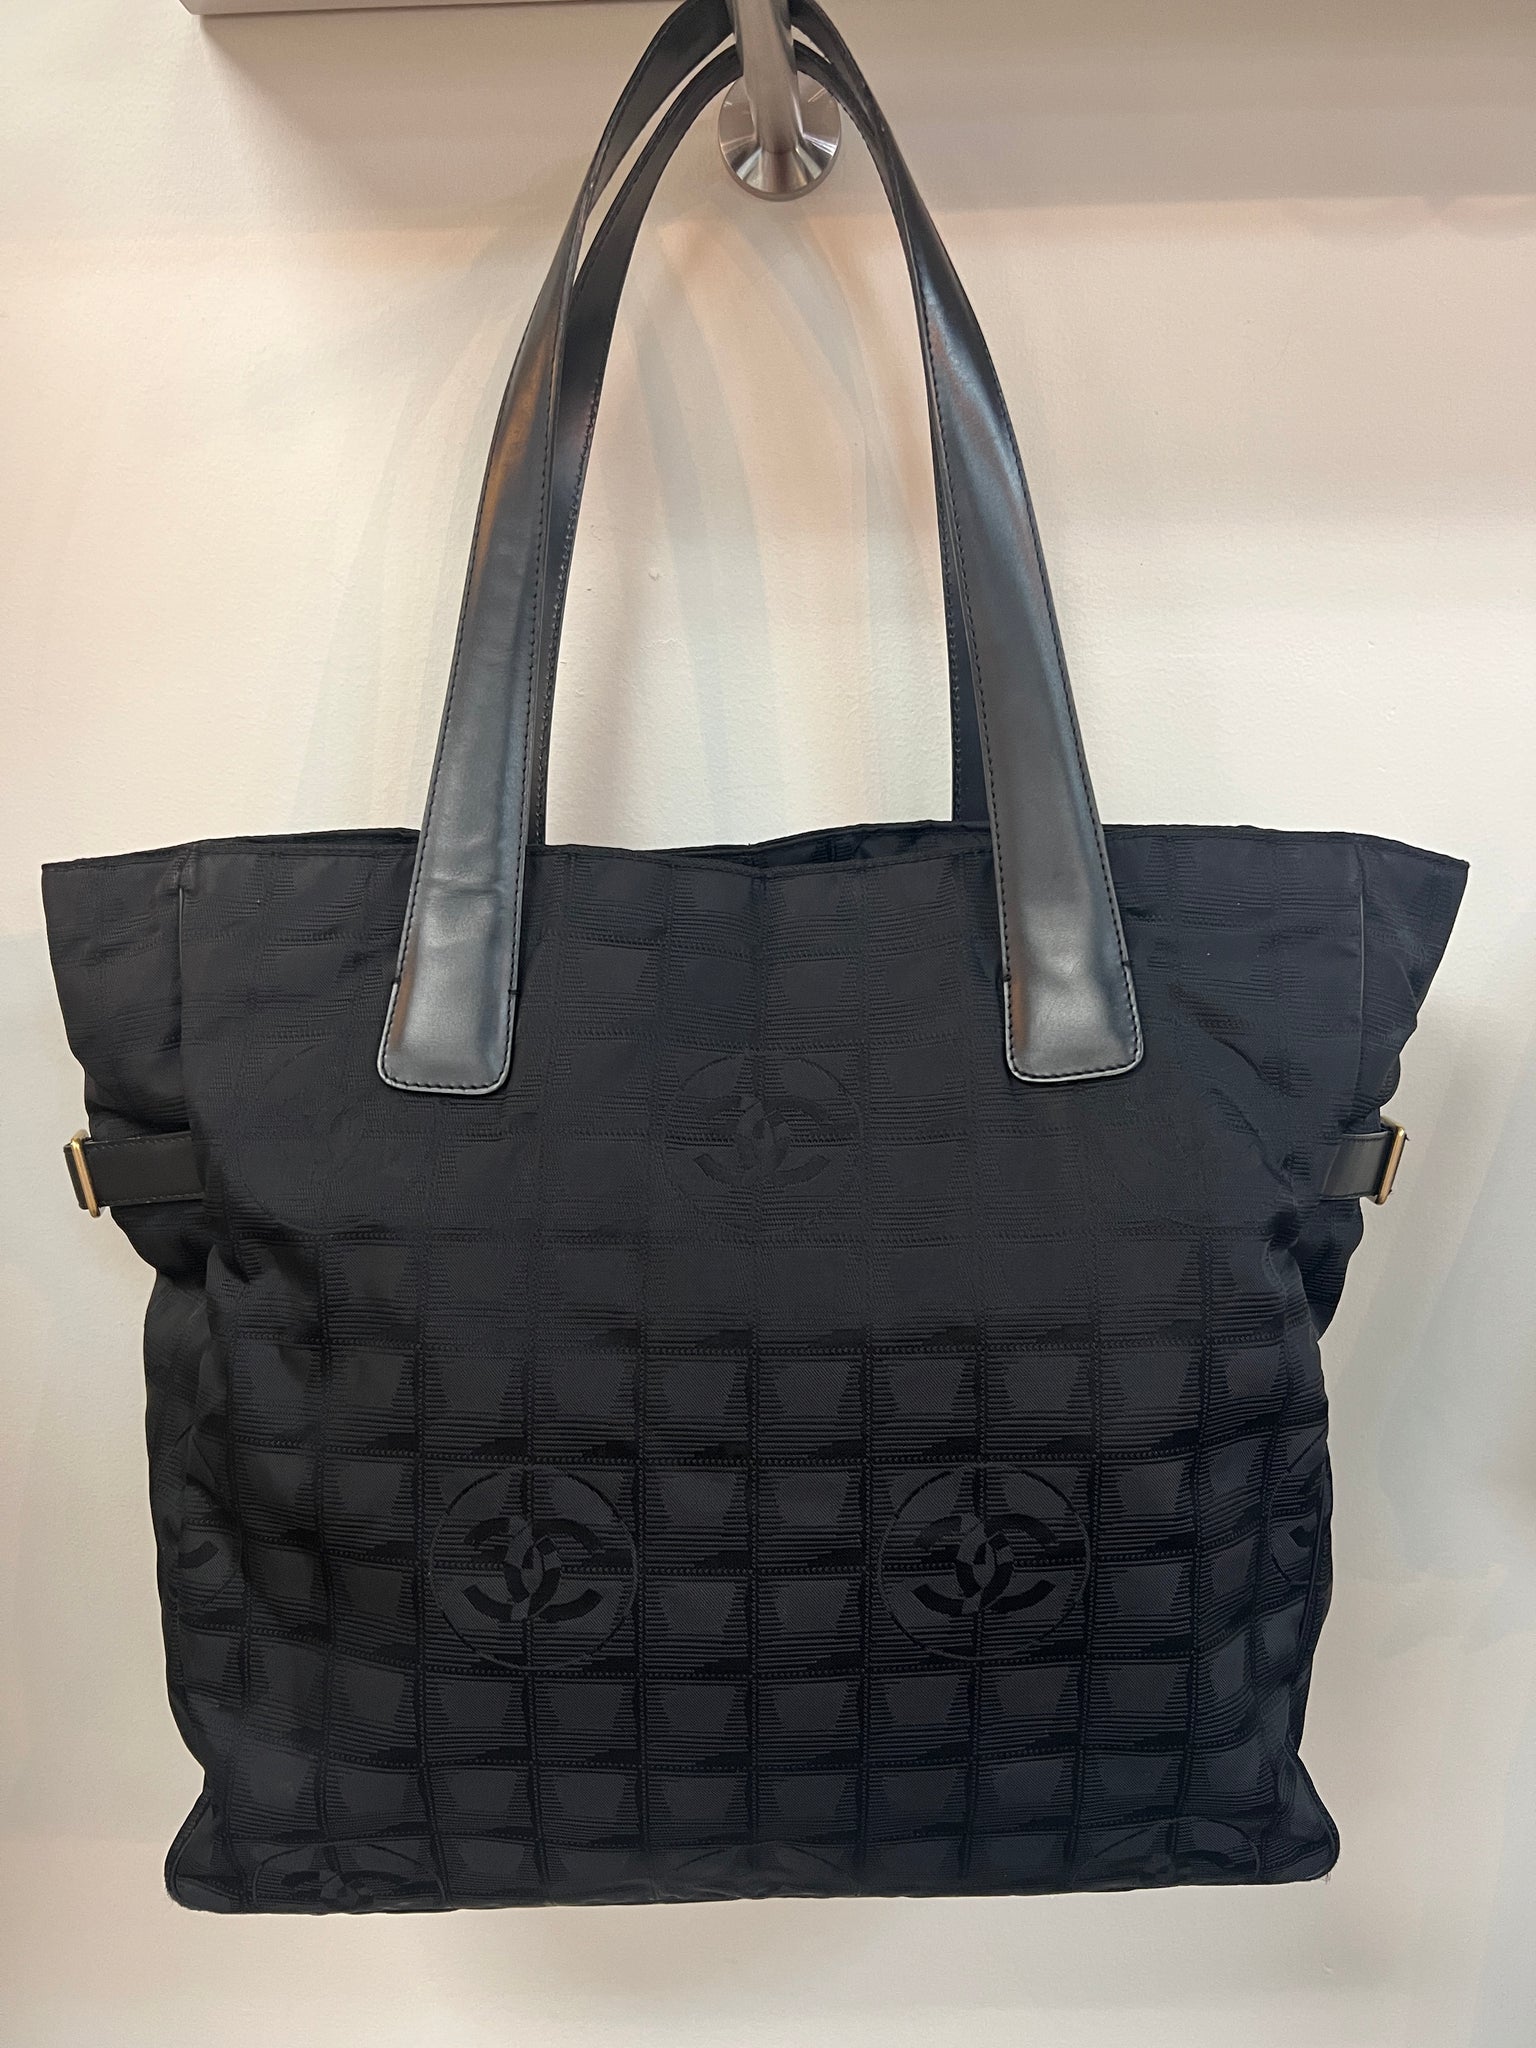 Chanel CC Black Nylon and Leather Travel Tote Bag